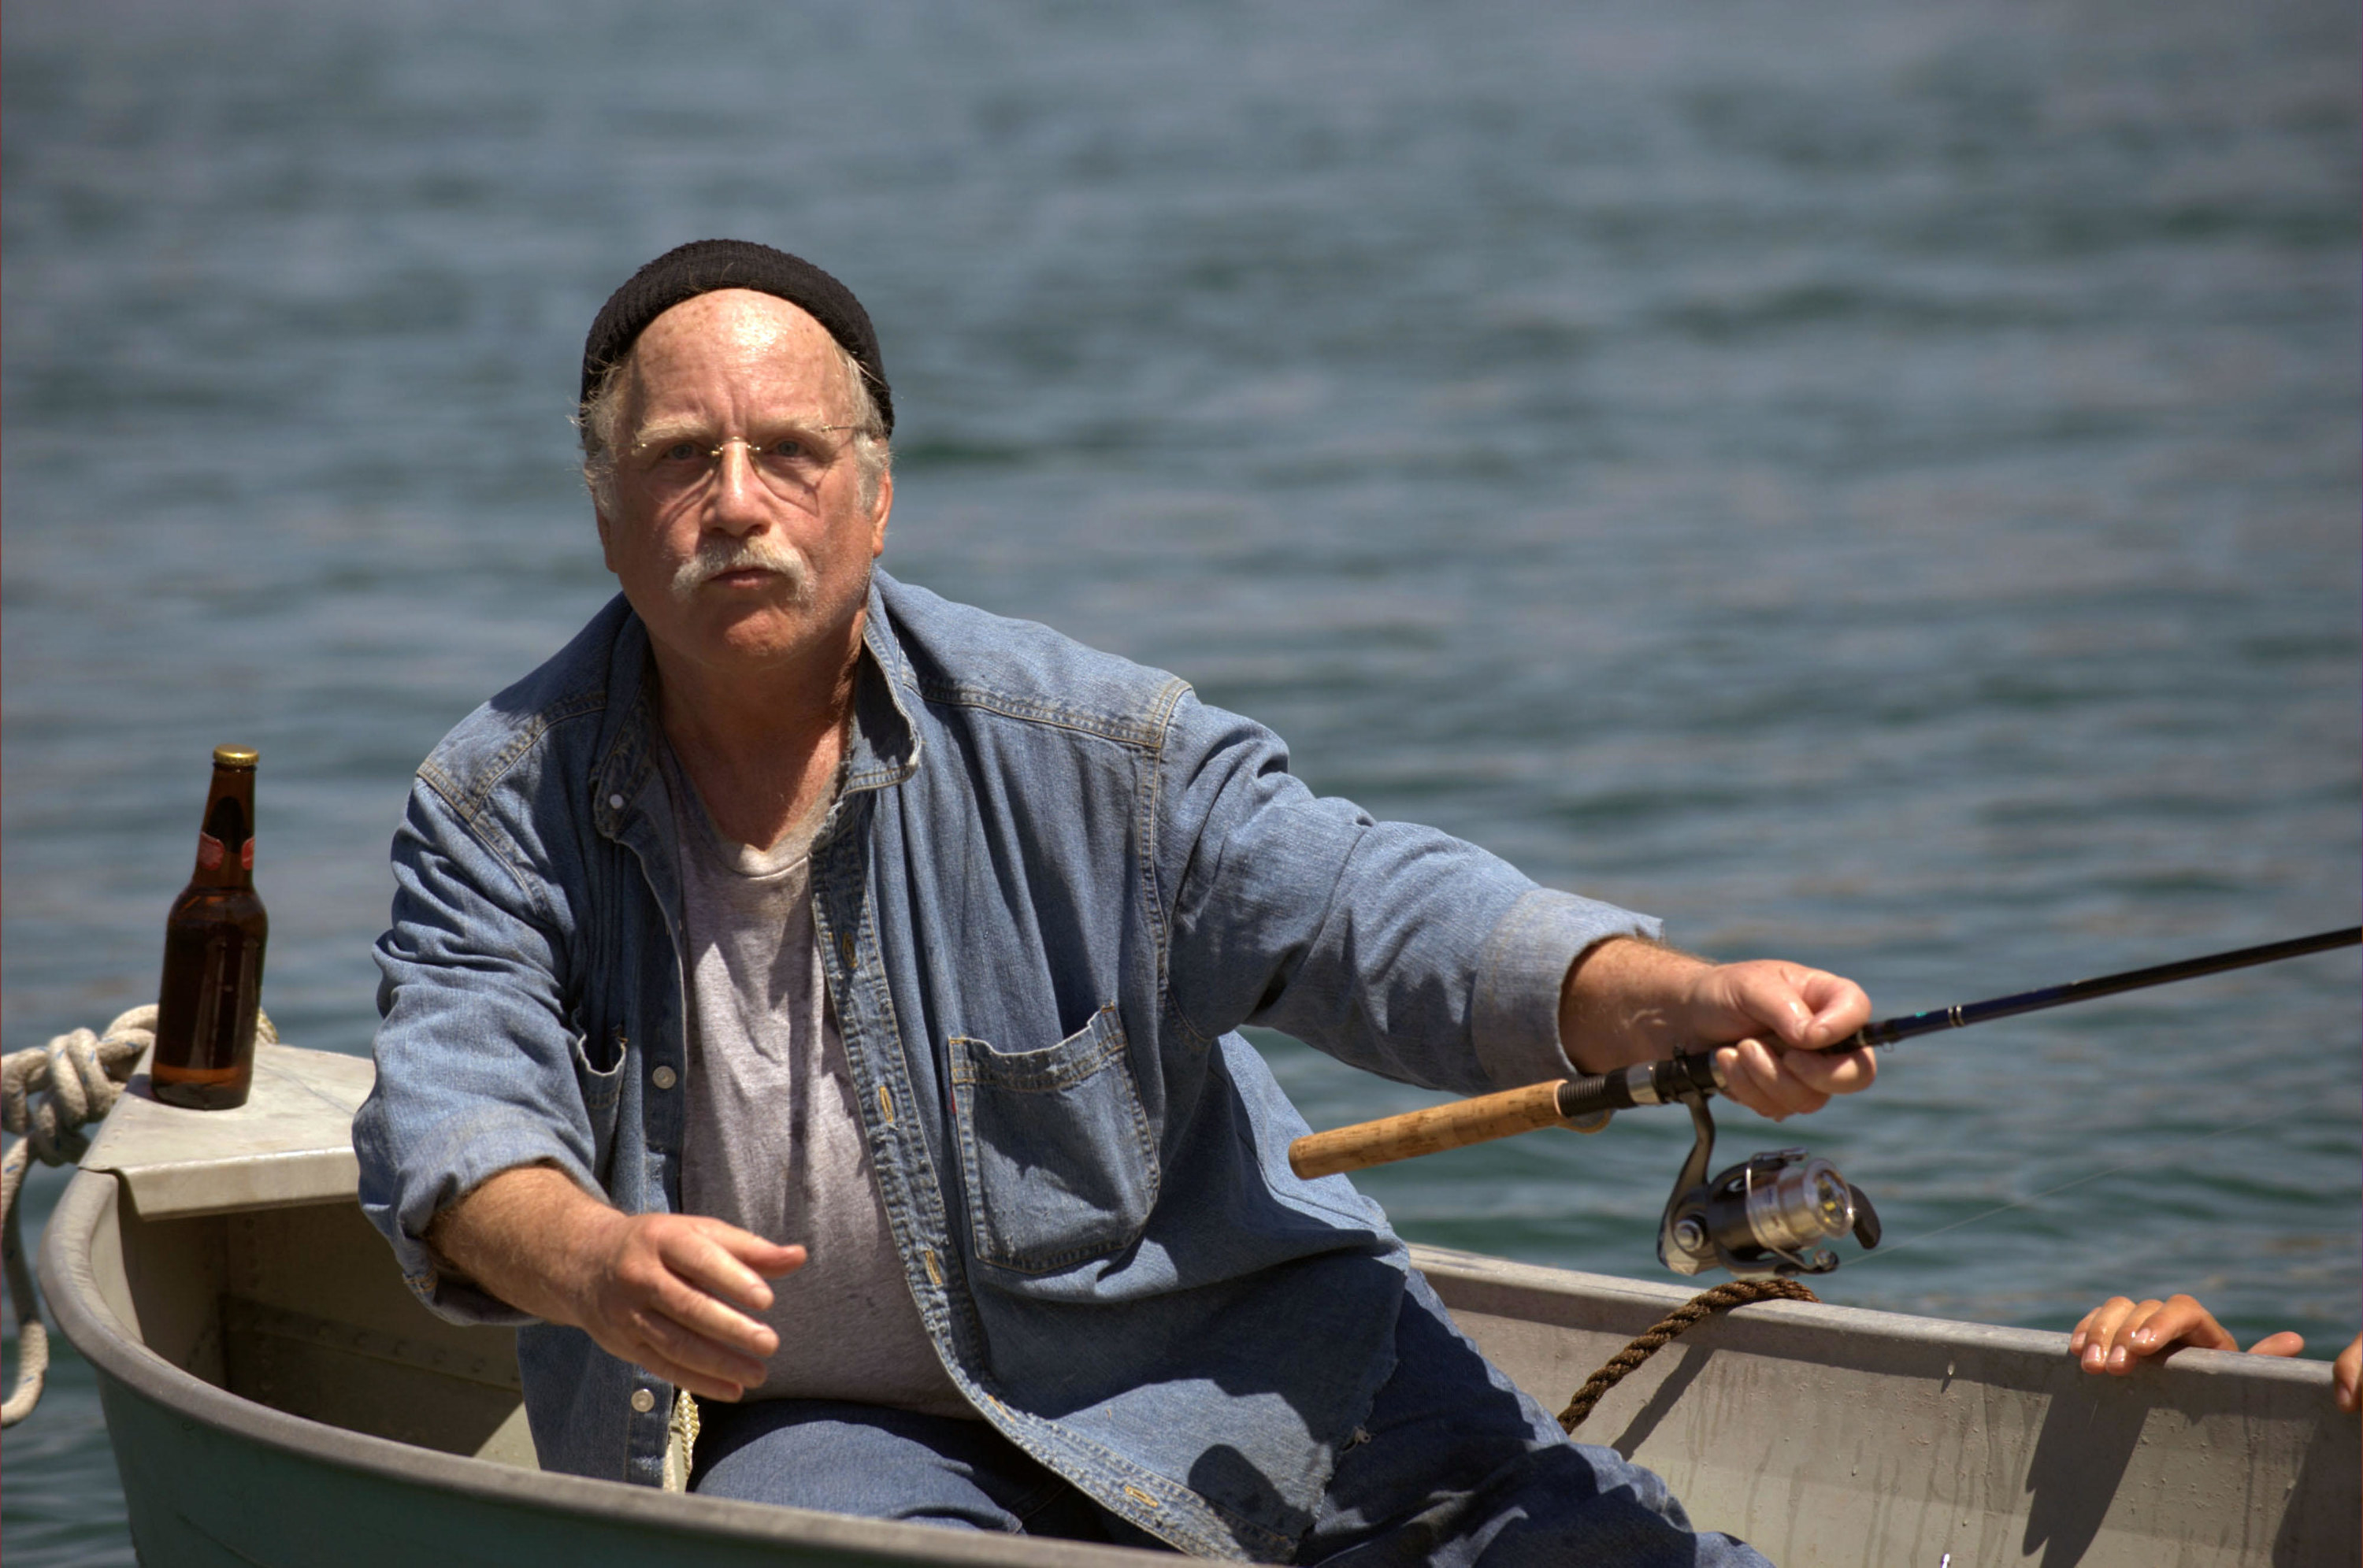 Richard Dreyfuss sits on a small boat with a bottle of beer and a fishing pole